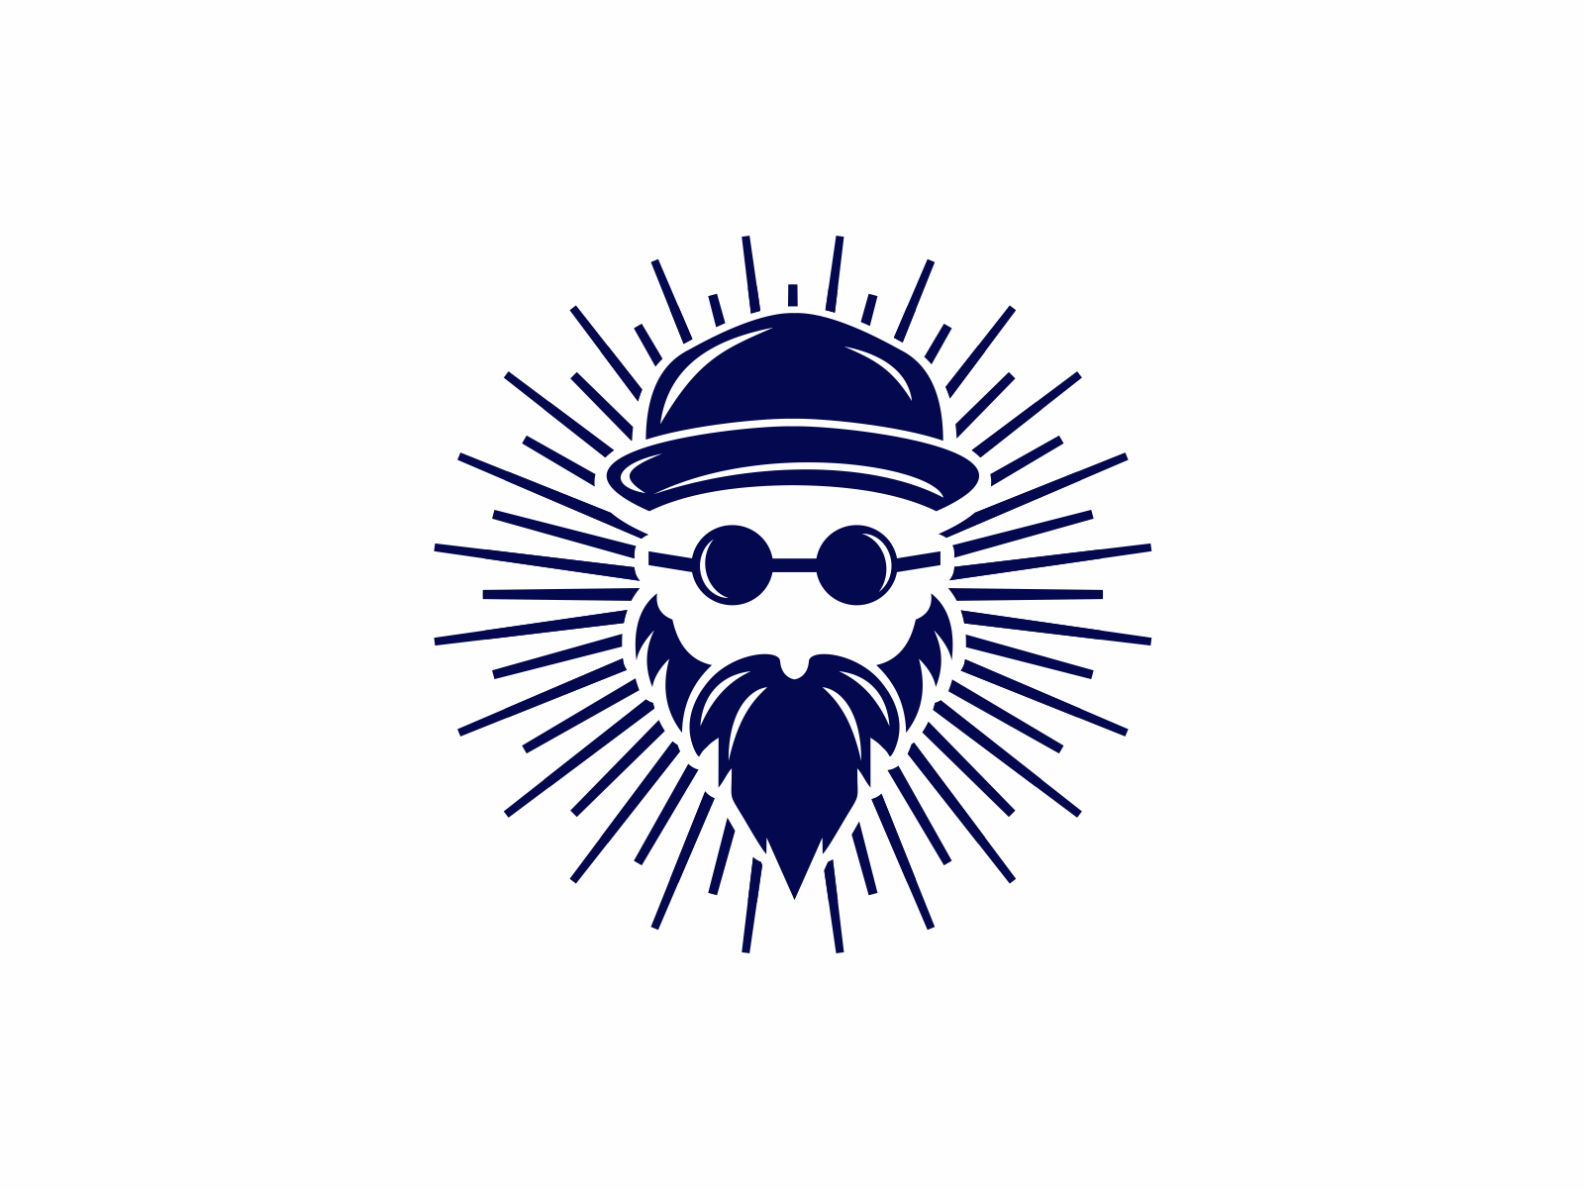 Old Man Vintage by Sallas on Dribbble